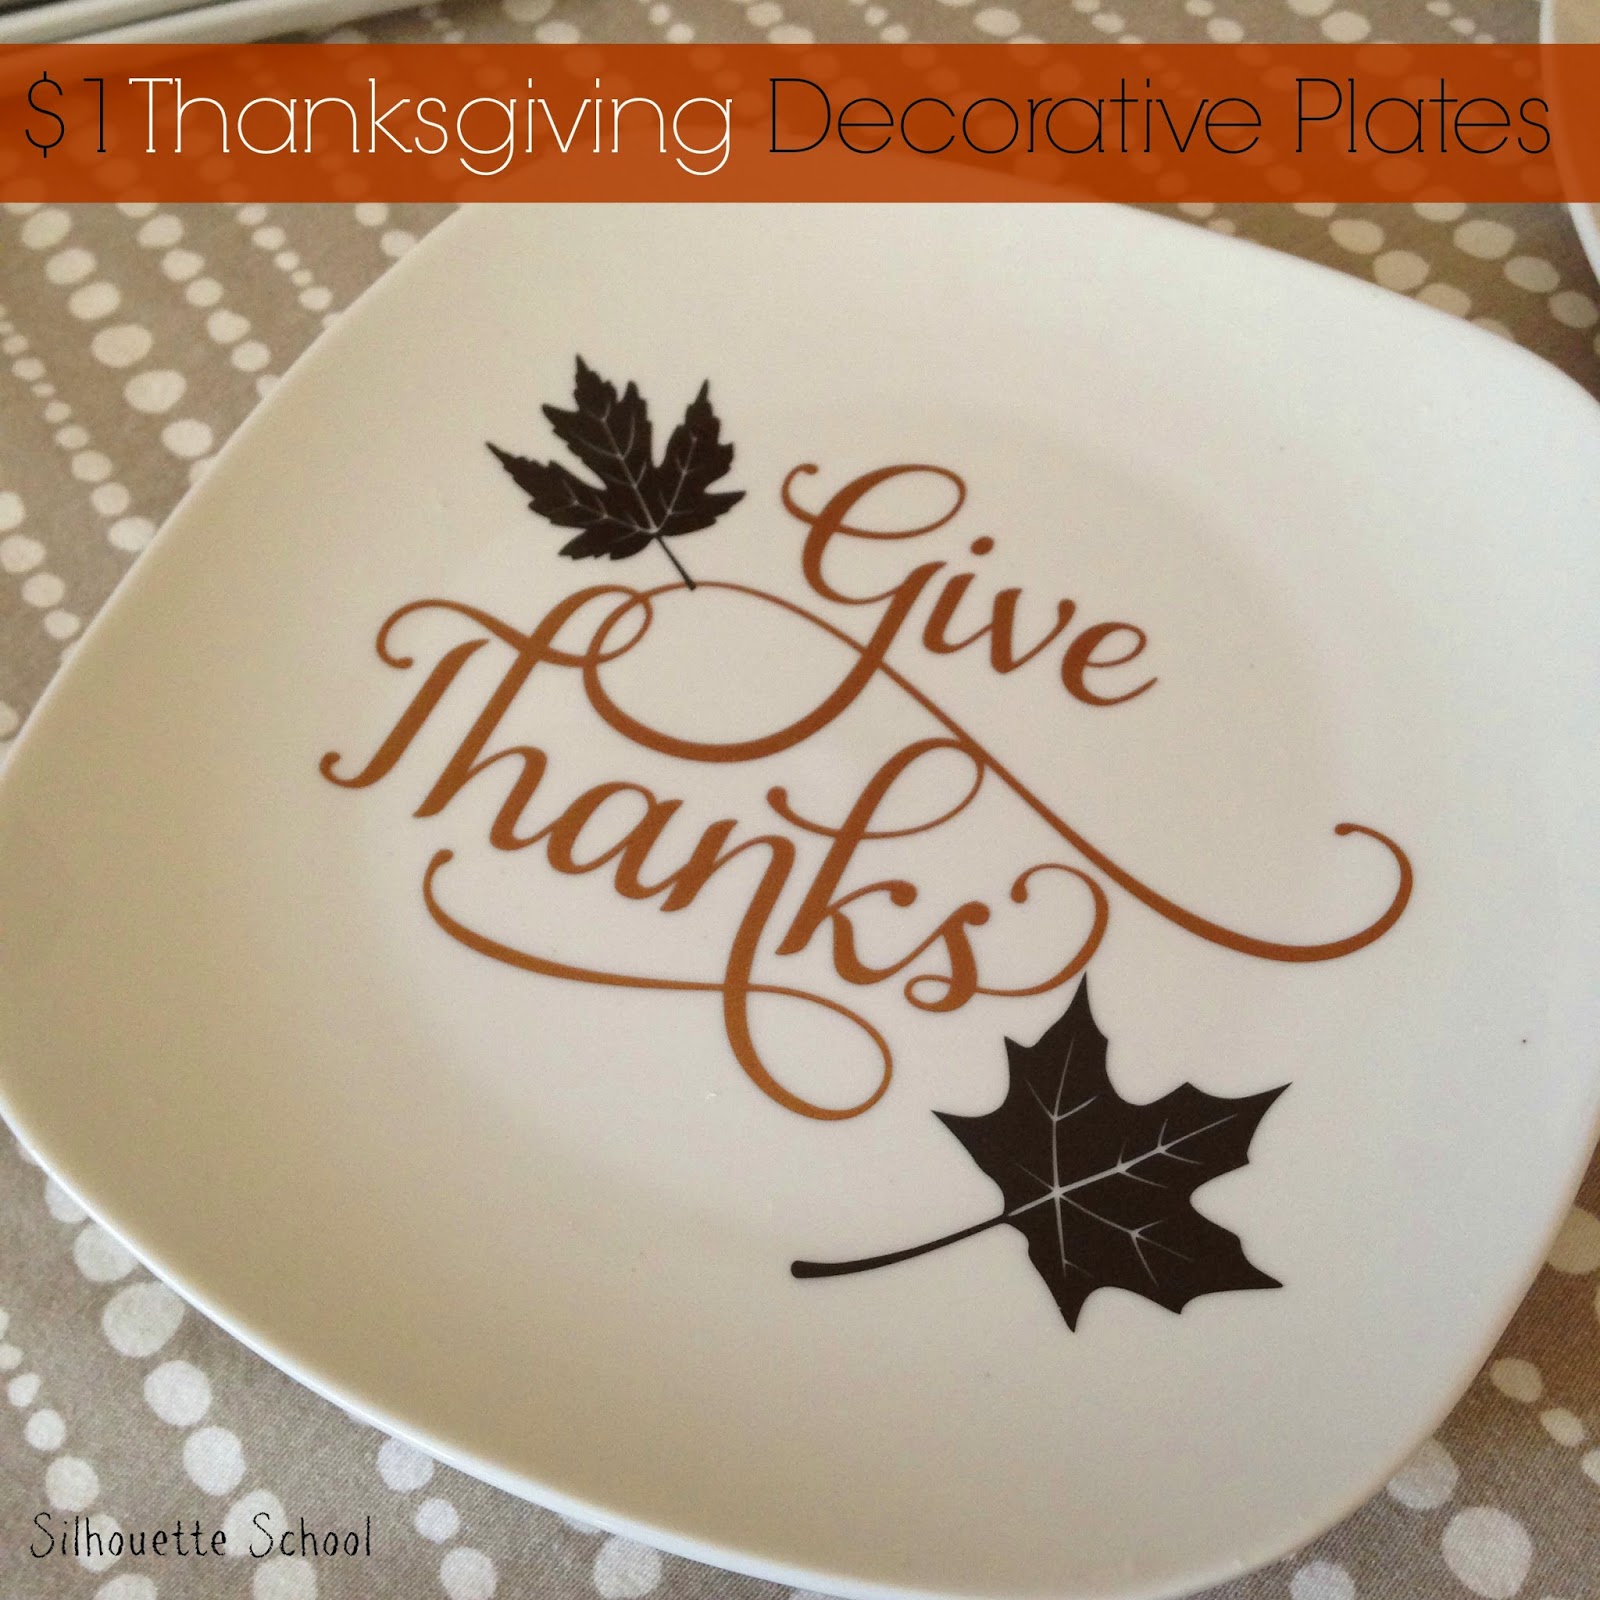 DIY, do it yourself, $1, thanksgiving, decorative plates